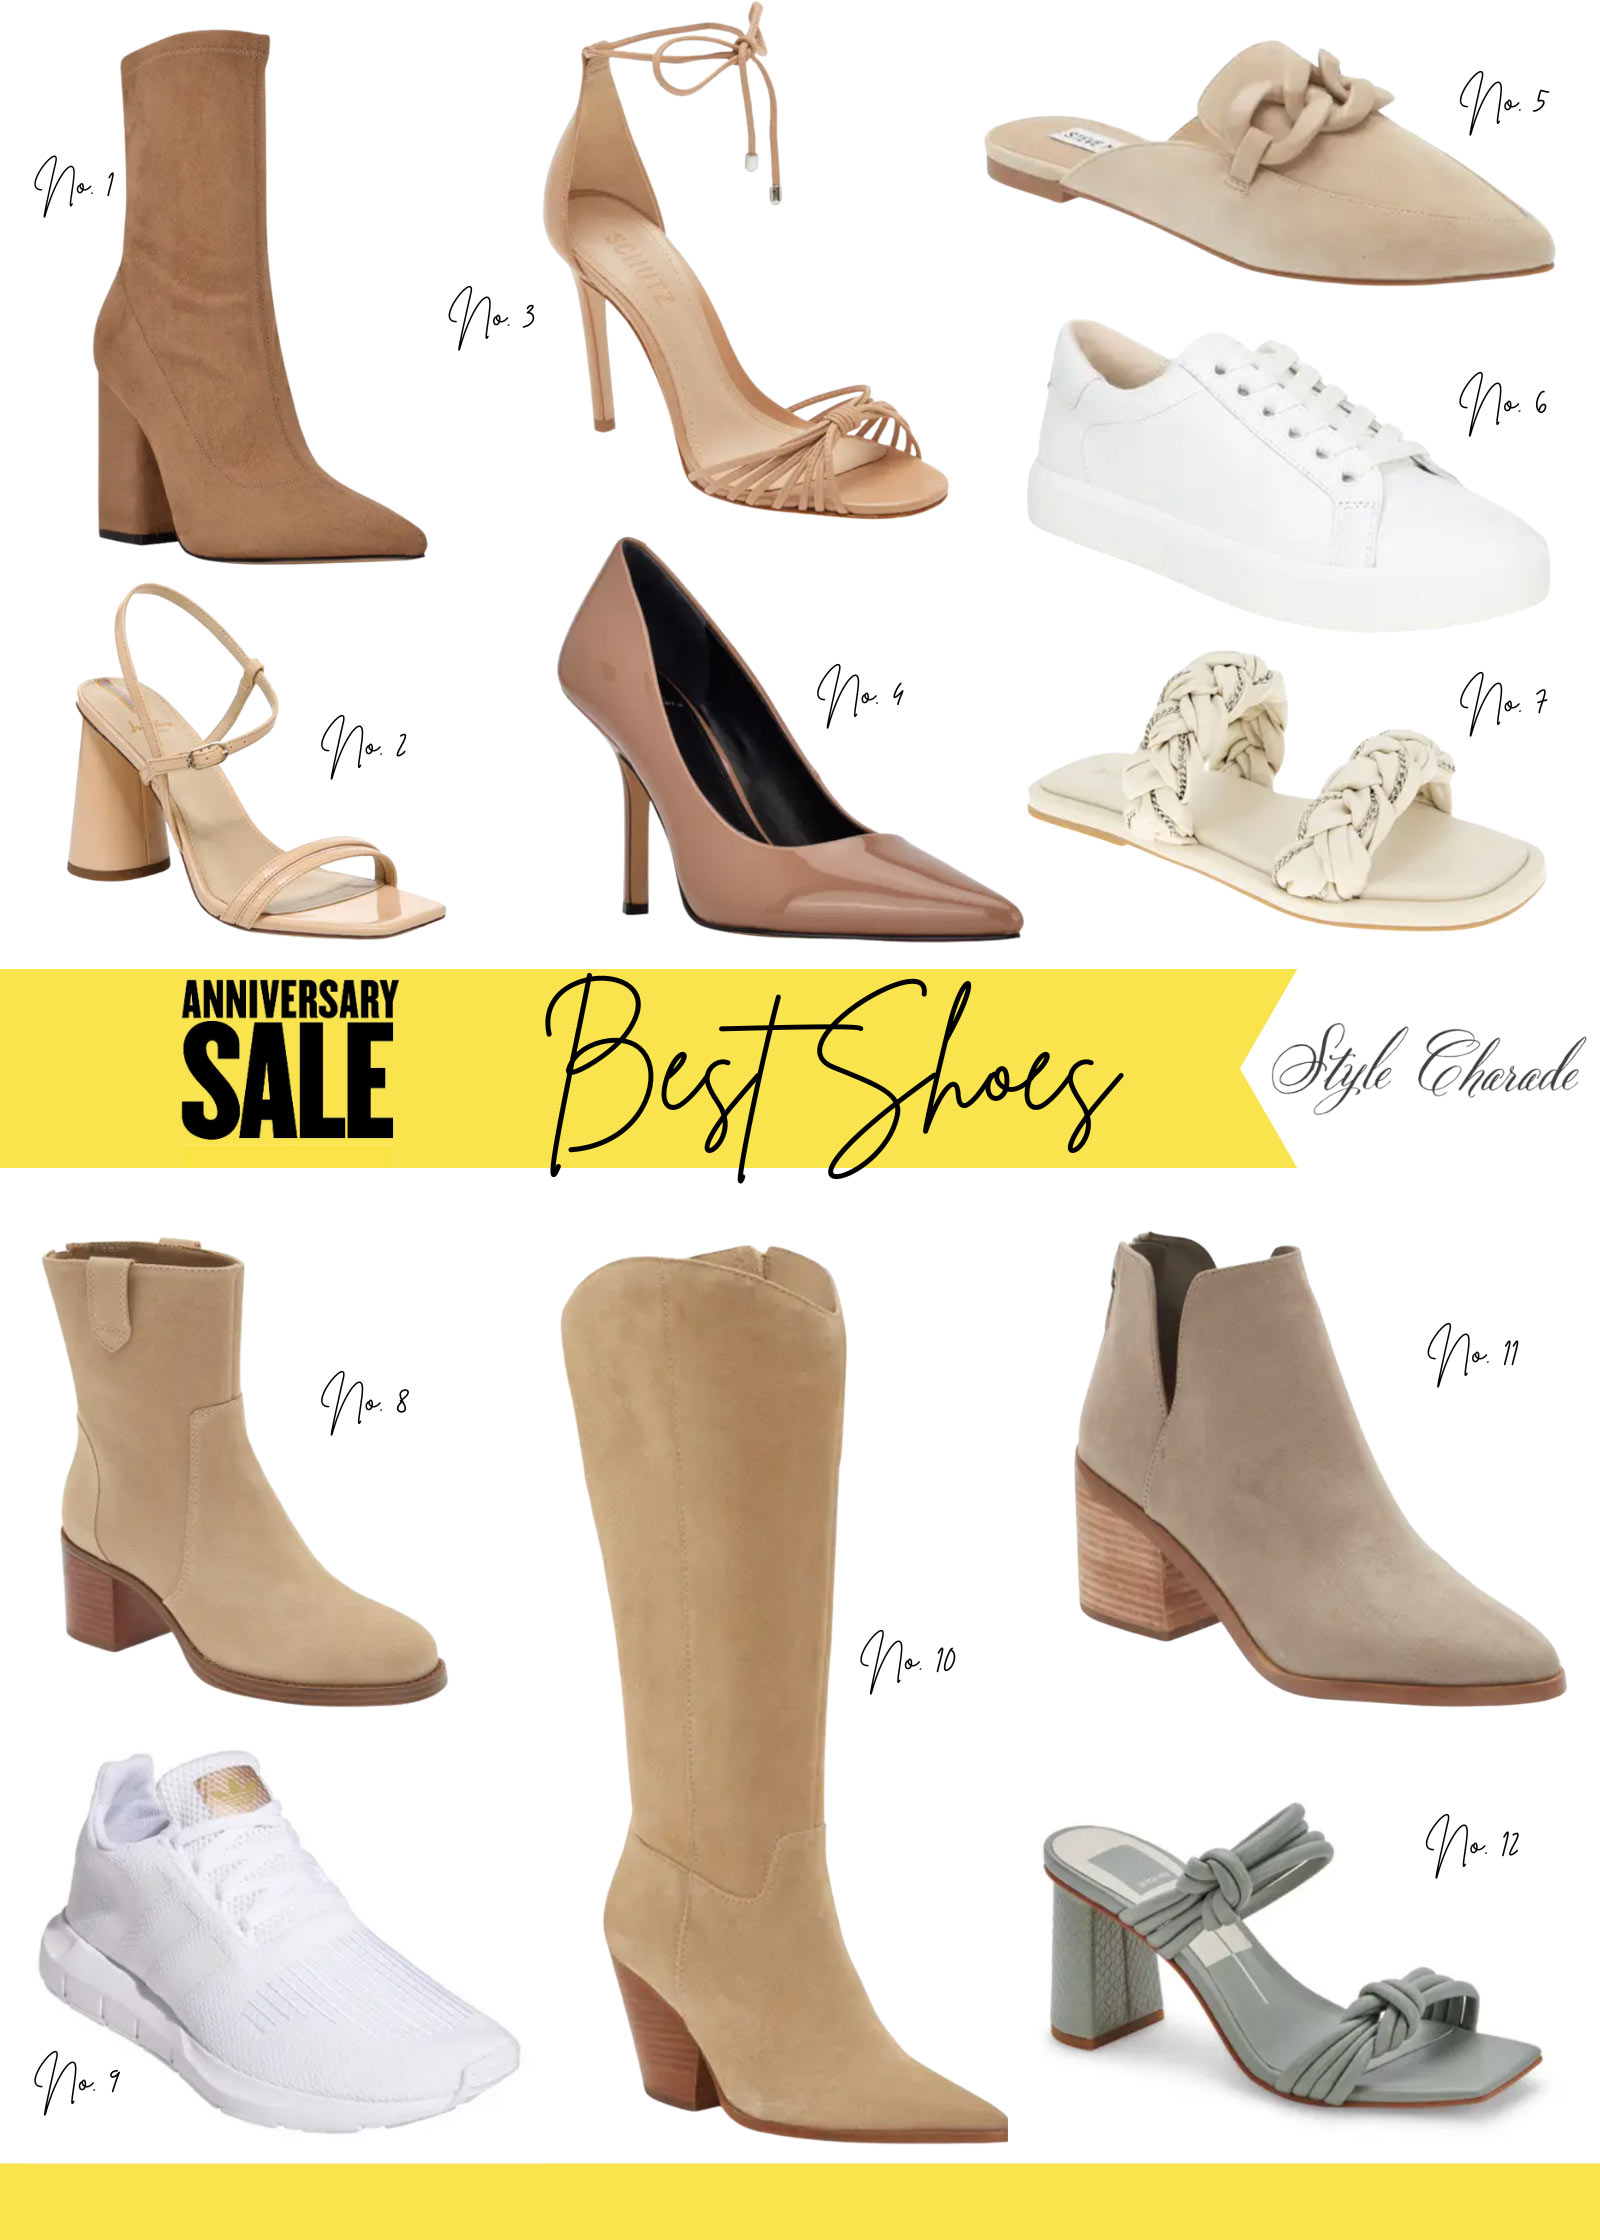 Nordstrom Anniversary Sale Shoes